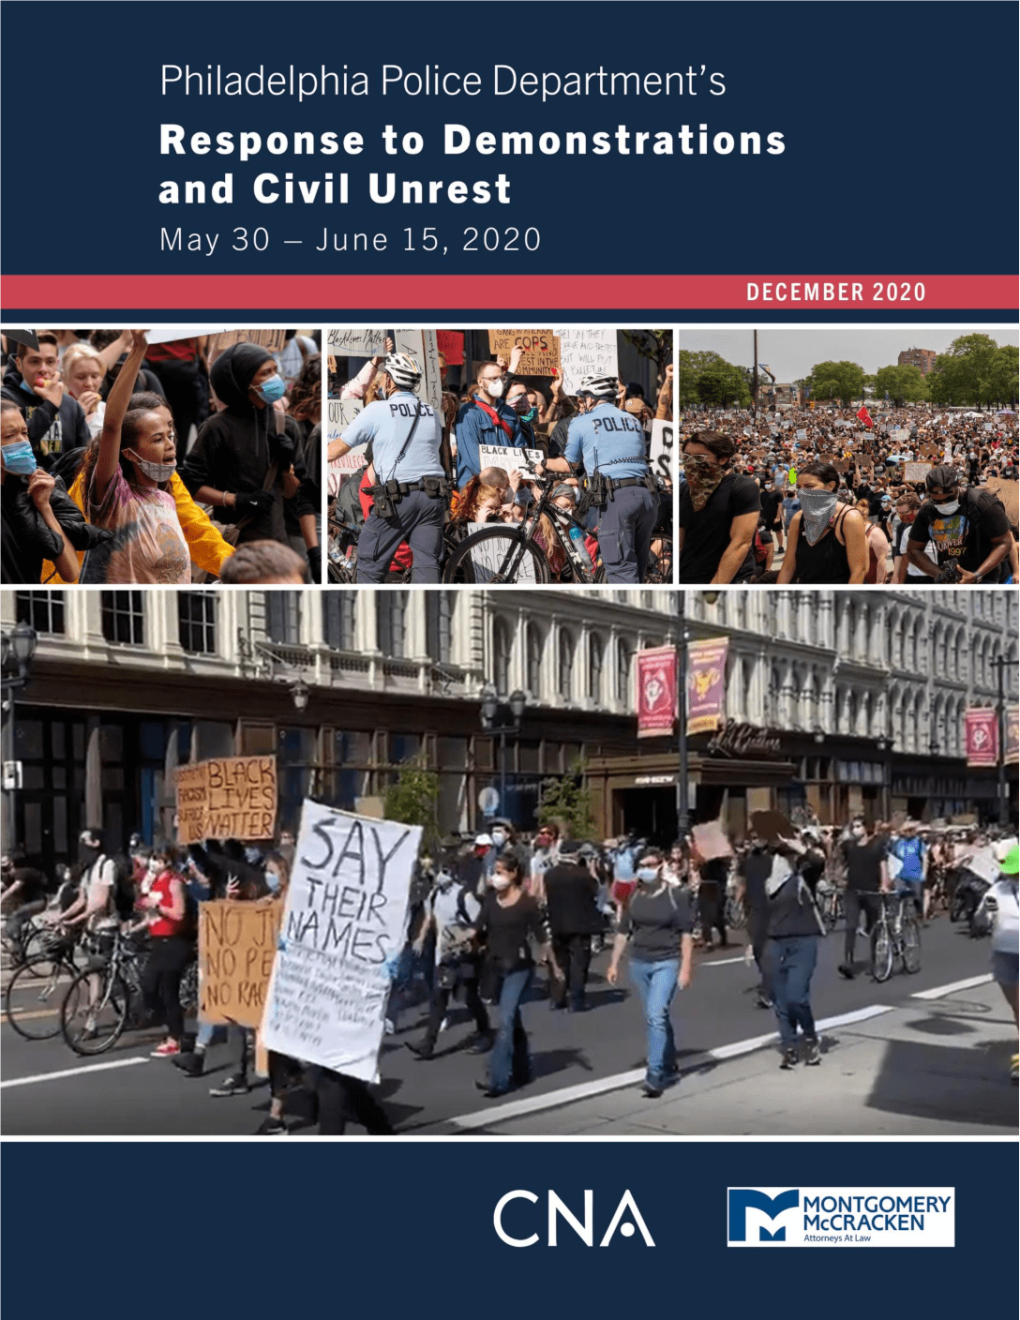 Philadelphia Police Department's Response to Demonstrations and Civil Unrest May 30 June 15, 2020